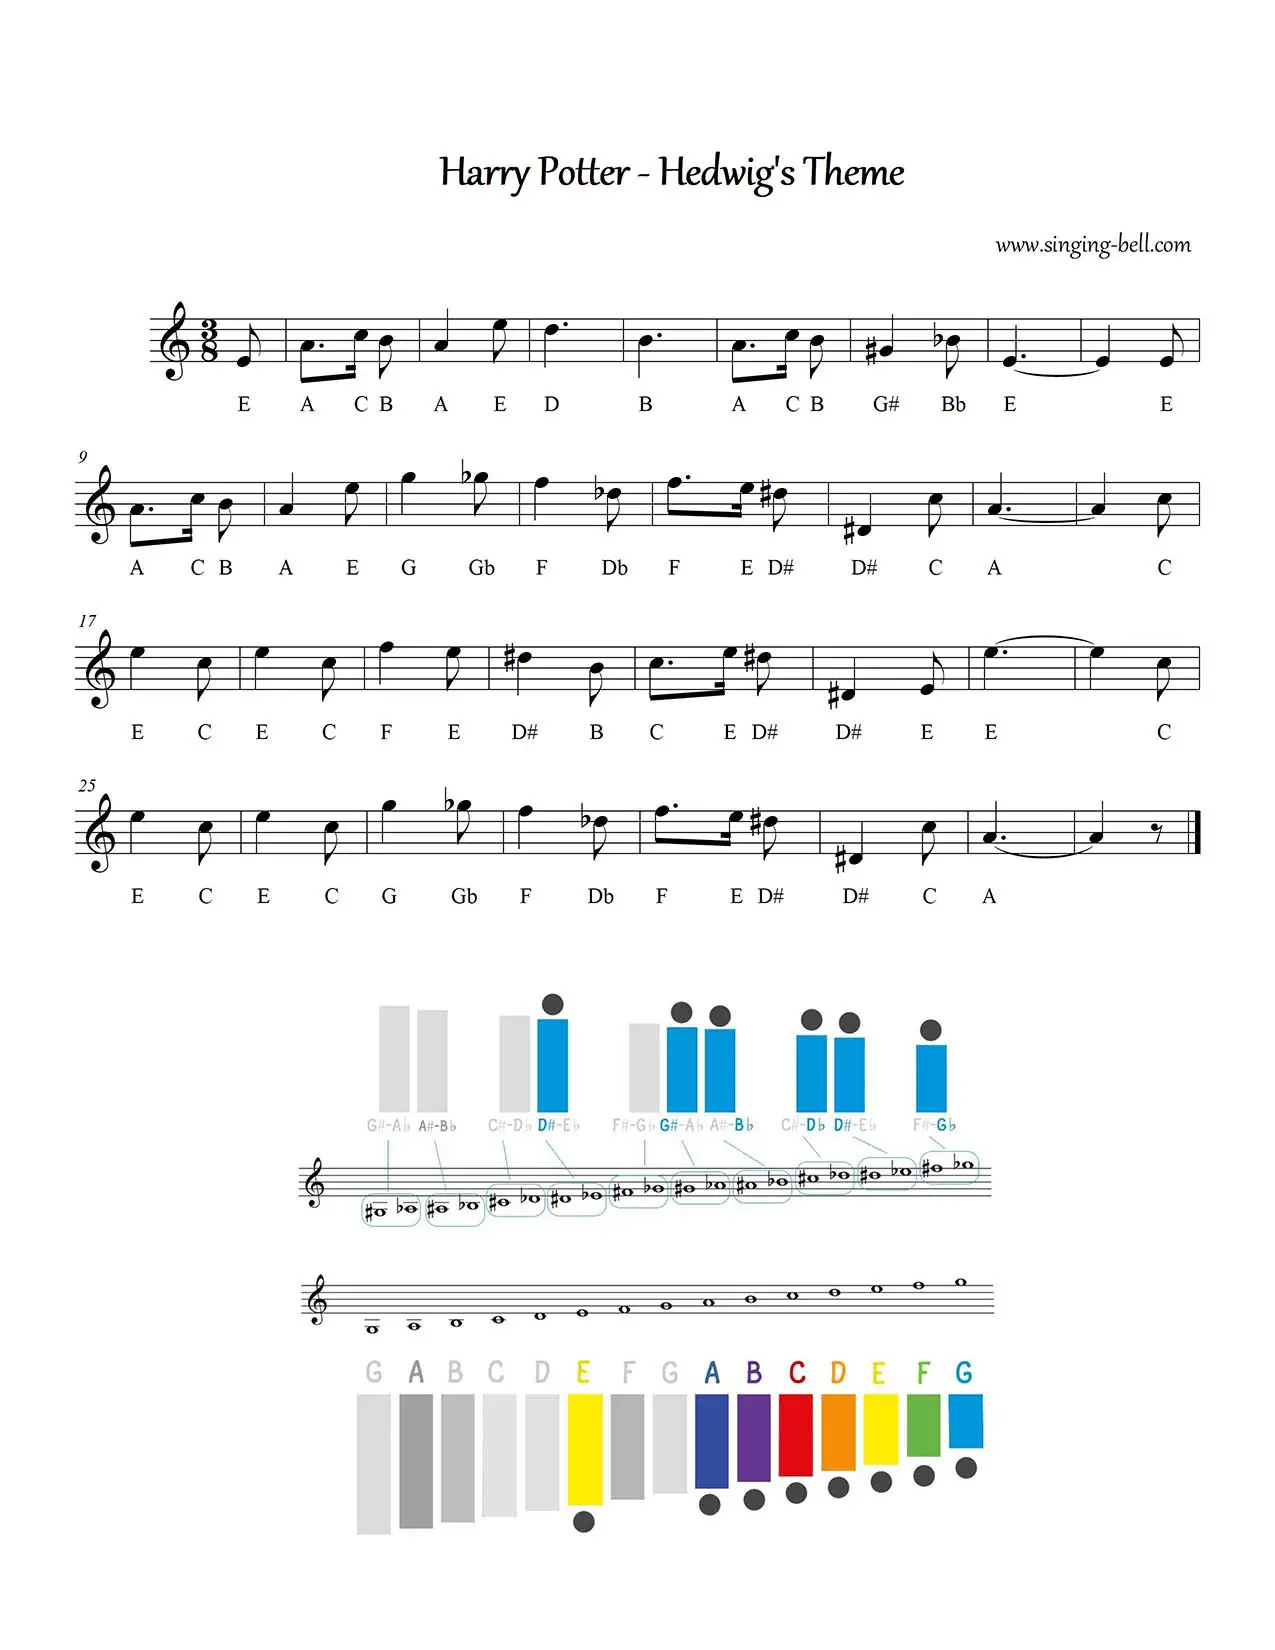 Harry Potter Hedwig's Theme free xylophone glockenspiel sheet music notes chart pdf